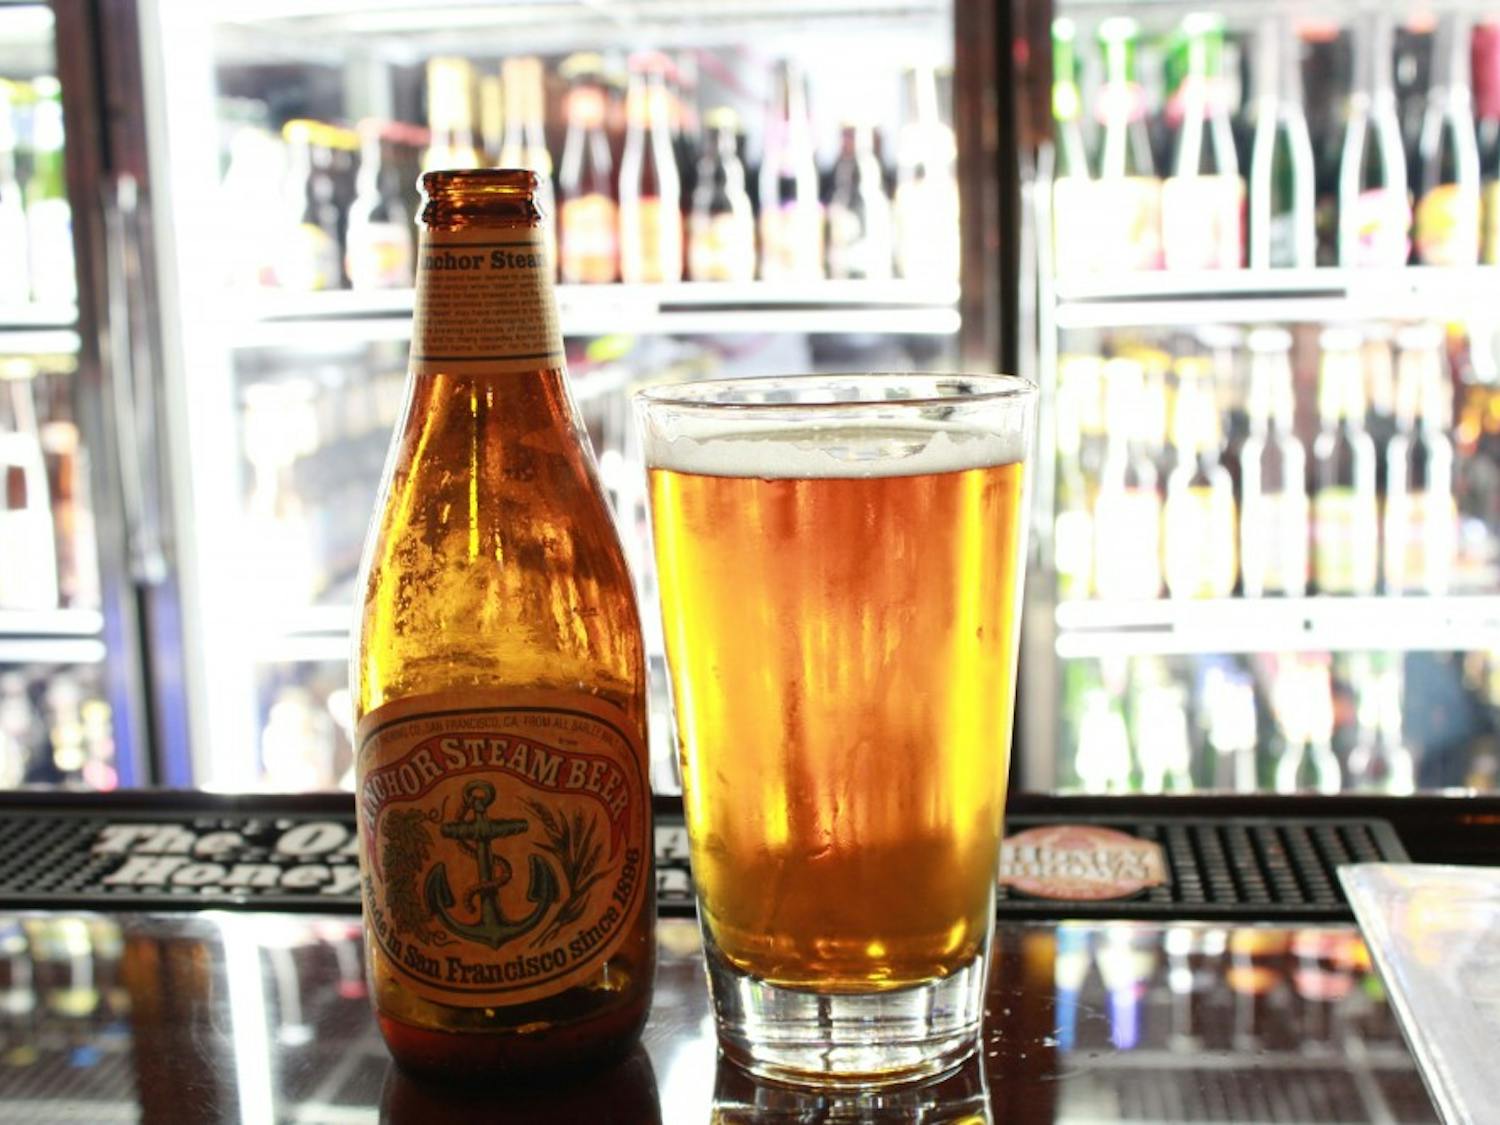 One of the many beers WOB has to offer.
Photo by Mike Brilliant